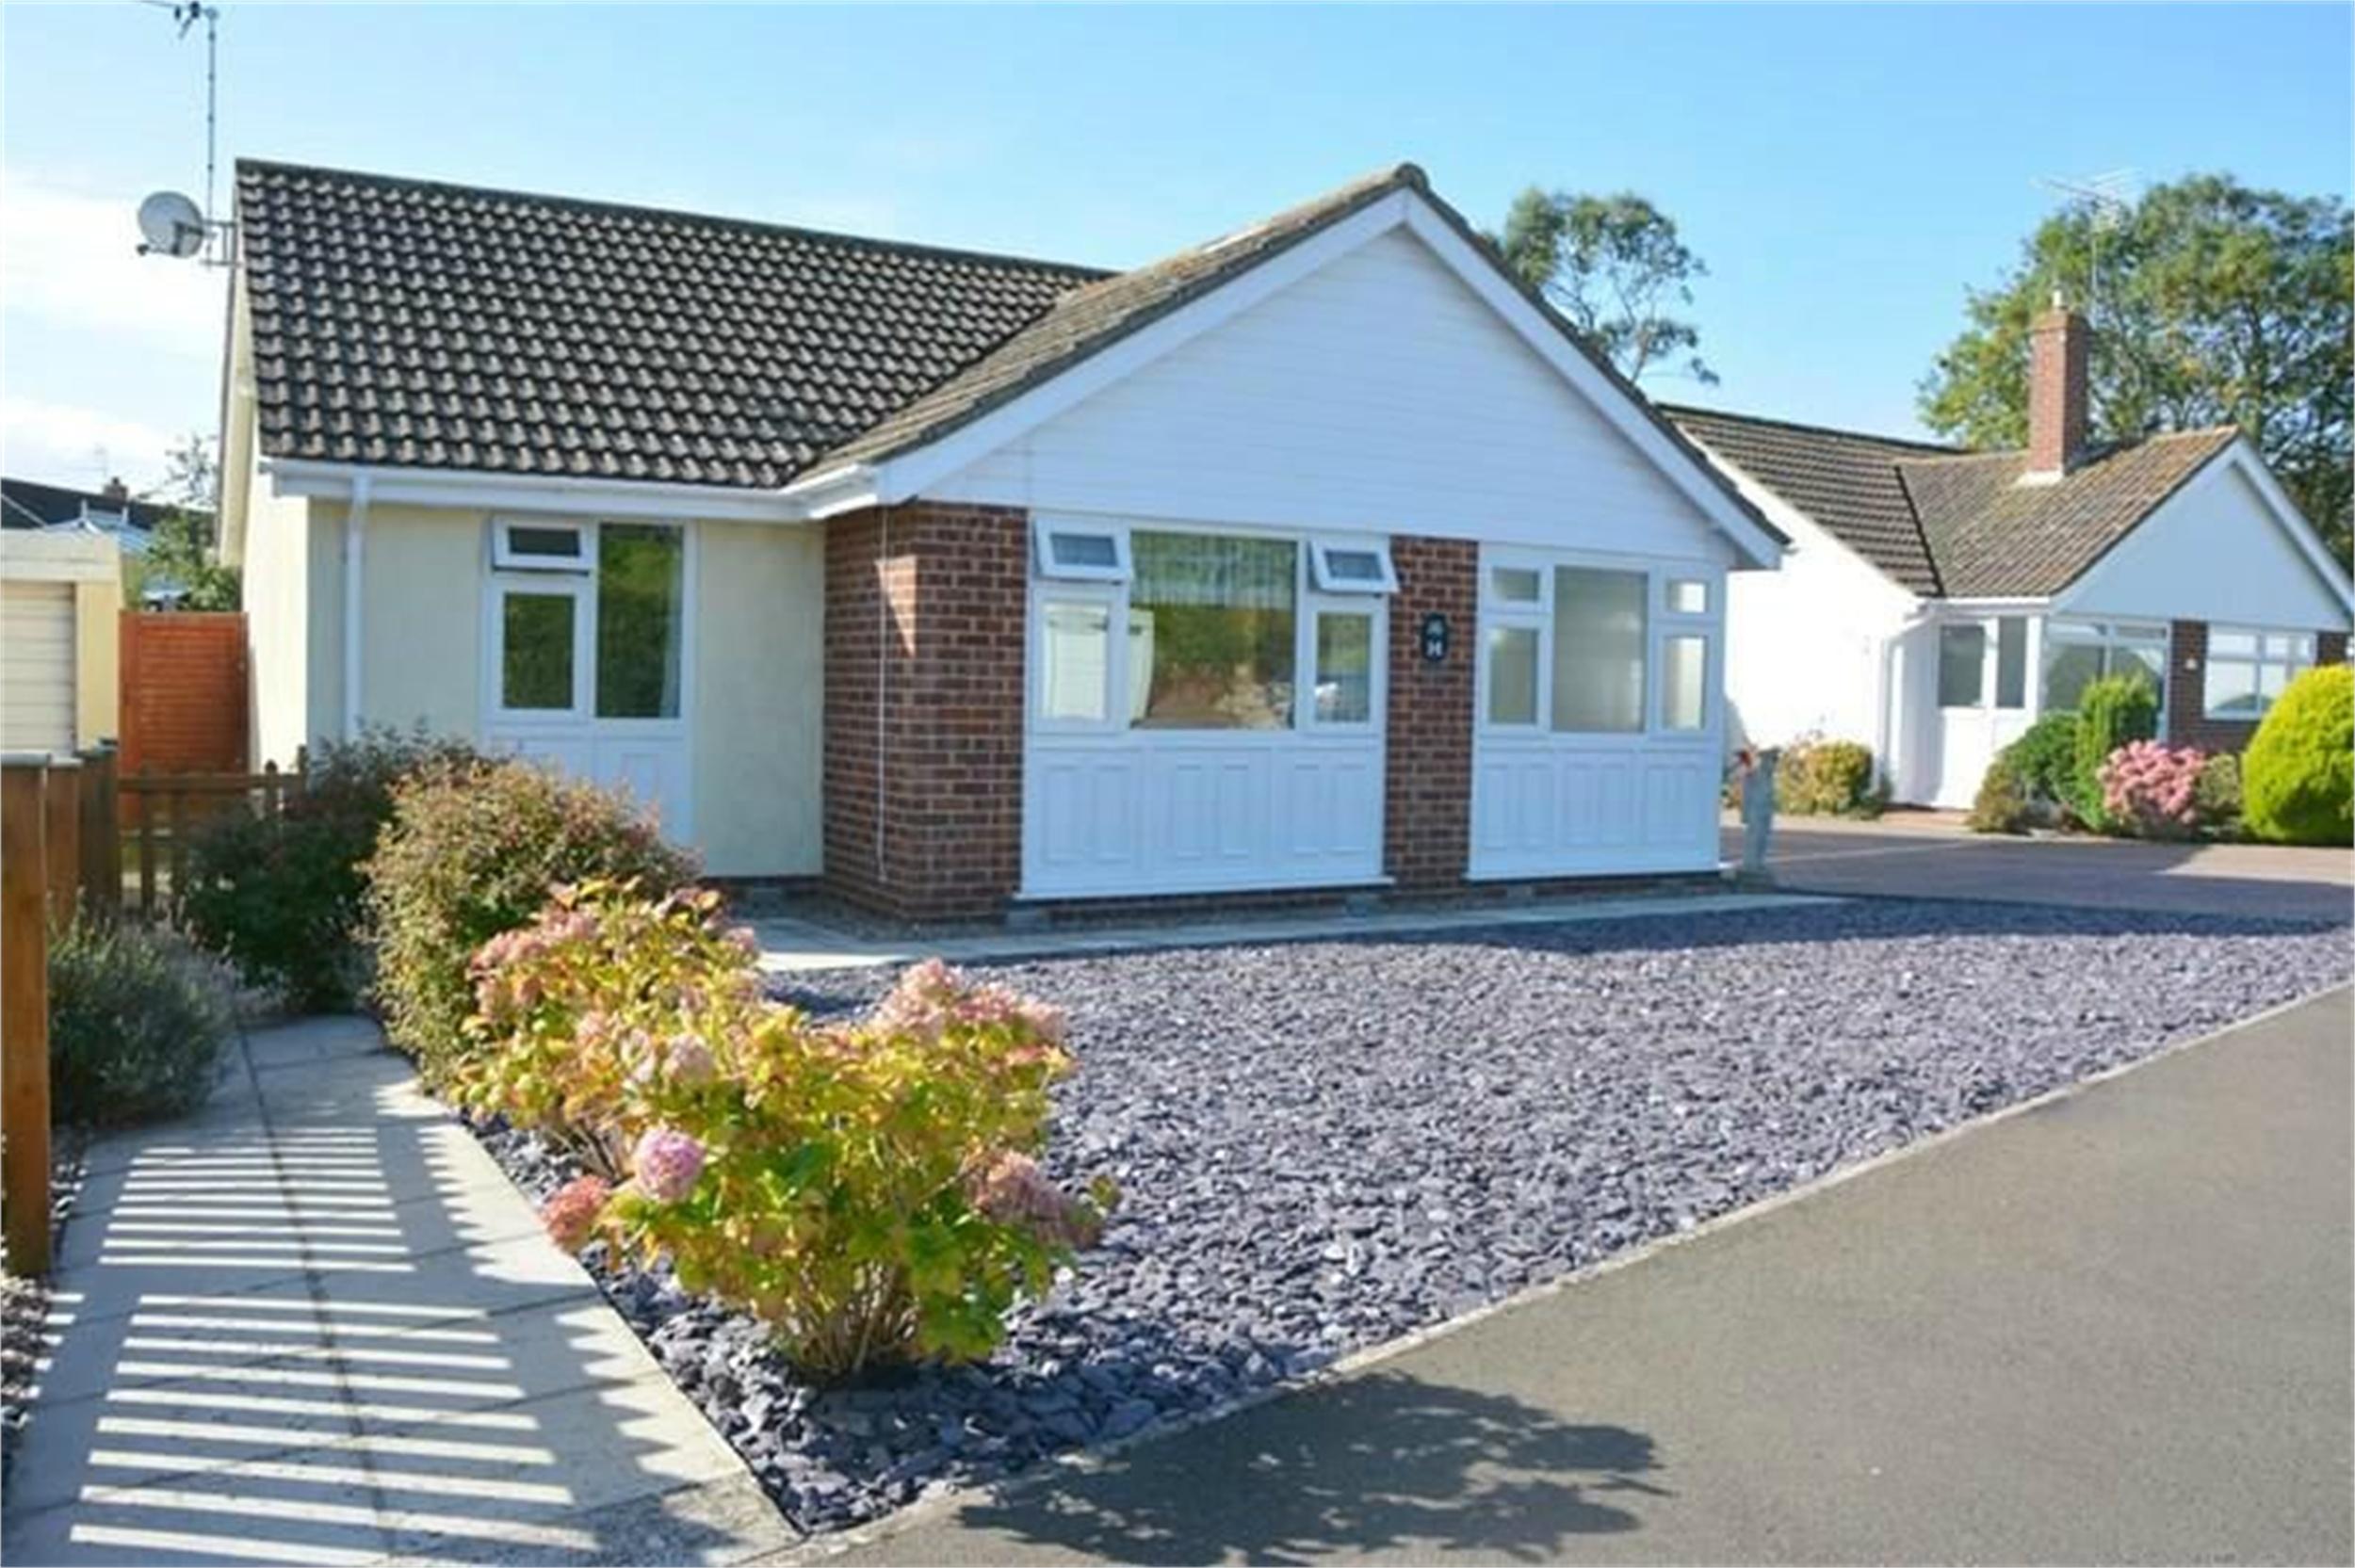 Bungalows for sale in burnham on sea